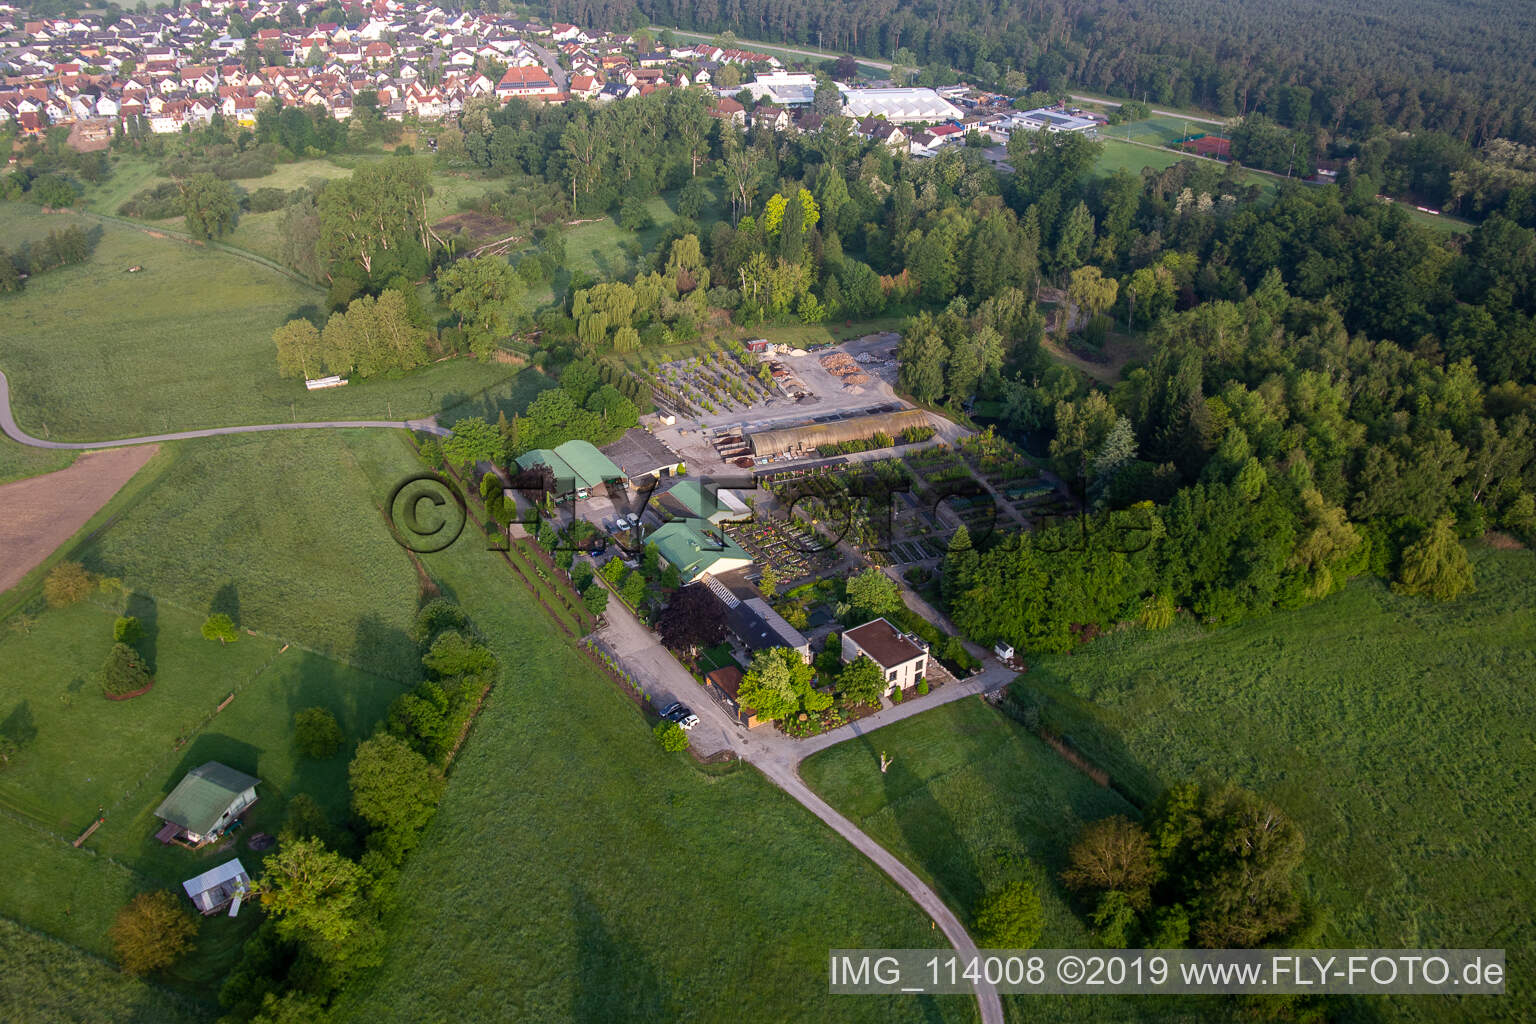 Bienwald tree nursery / Greentec in Berg in the state Rhineland-Palatinate, Germany out of the air